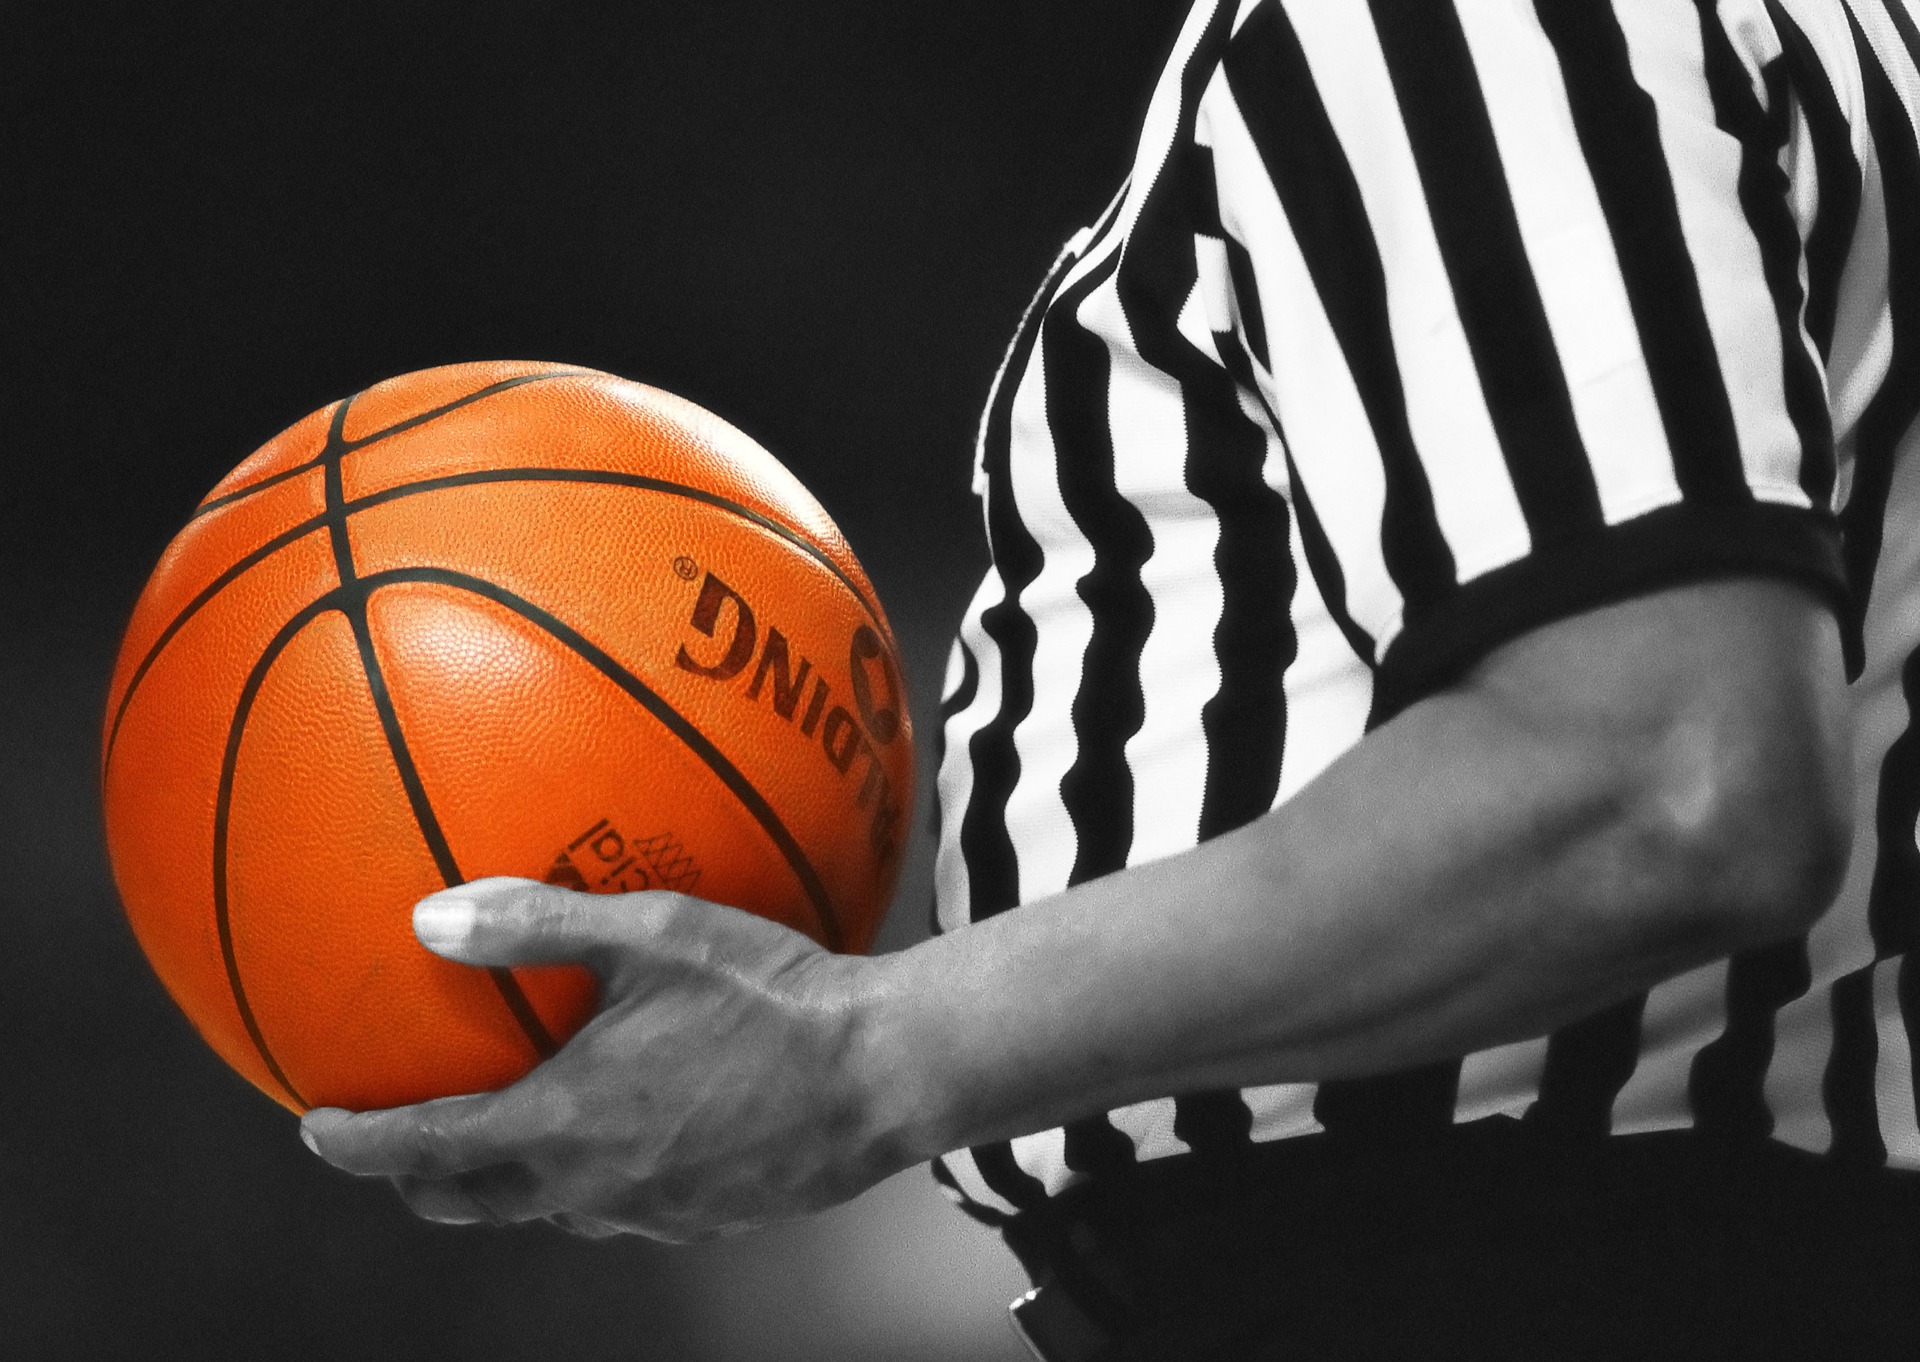 March Madness 2020: The Ball is in Your Court